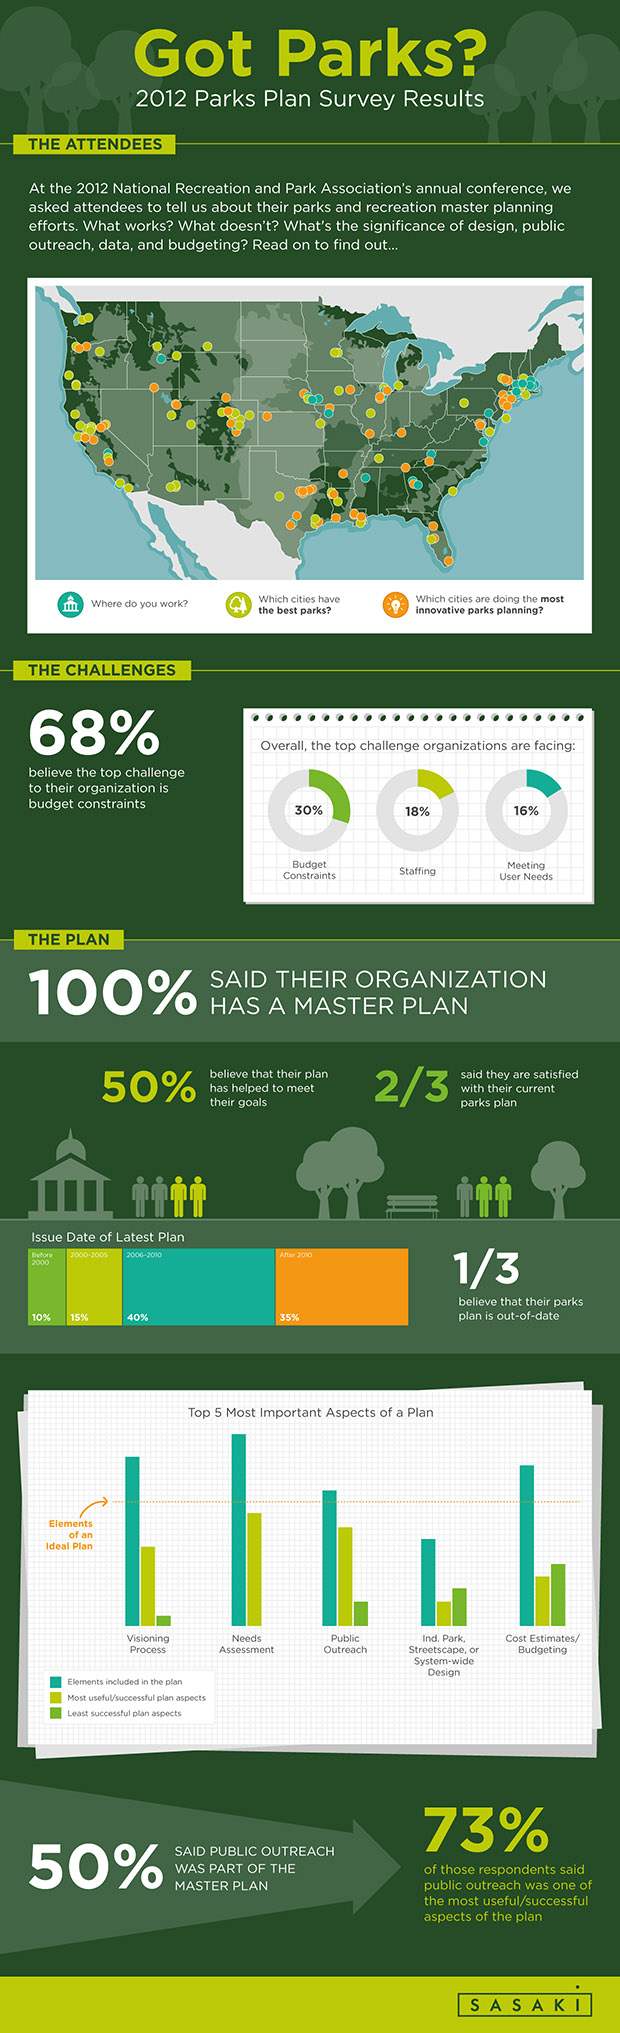 NRPA Infographic FINAL 121812